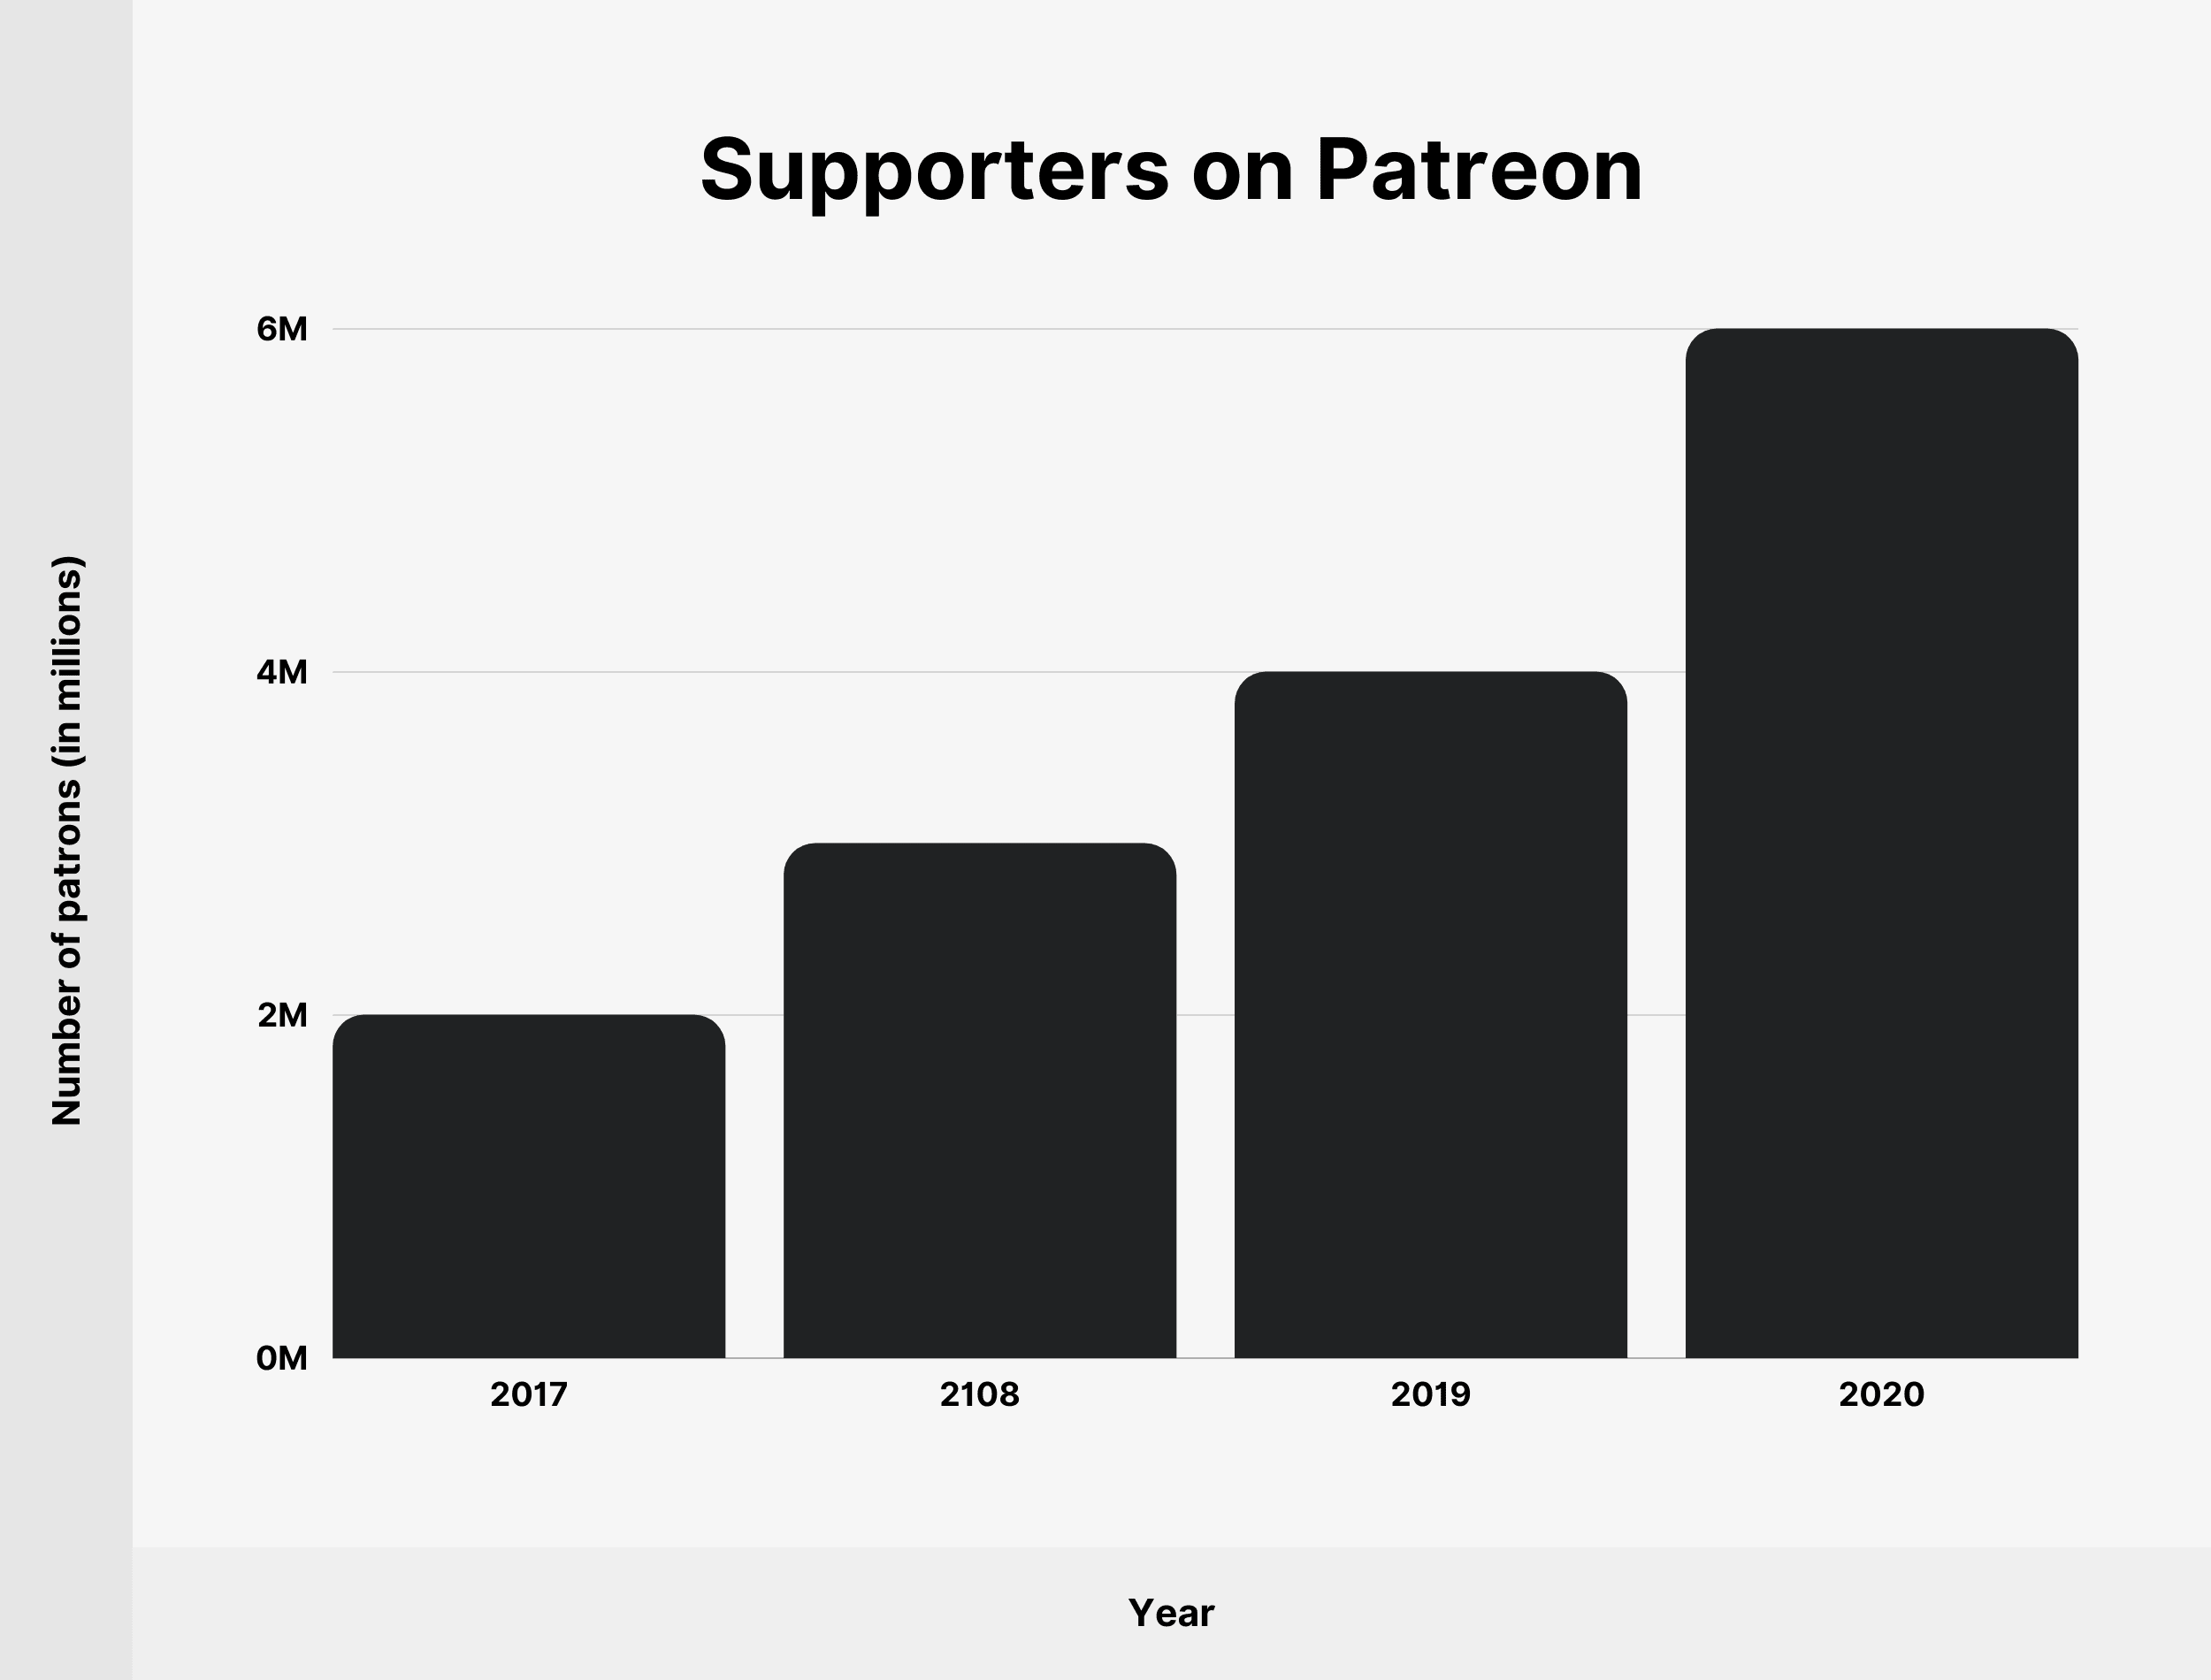 Supporters on Patreon